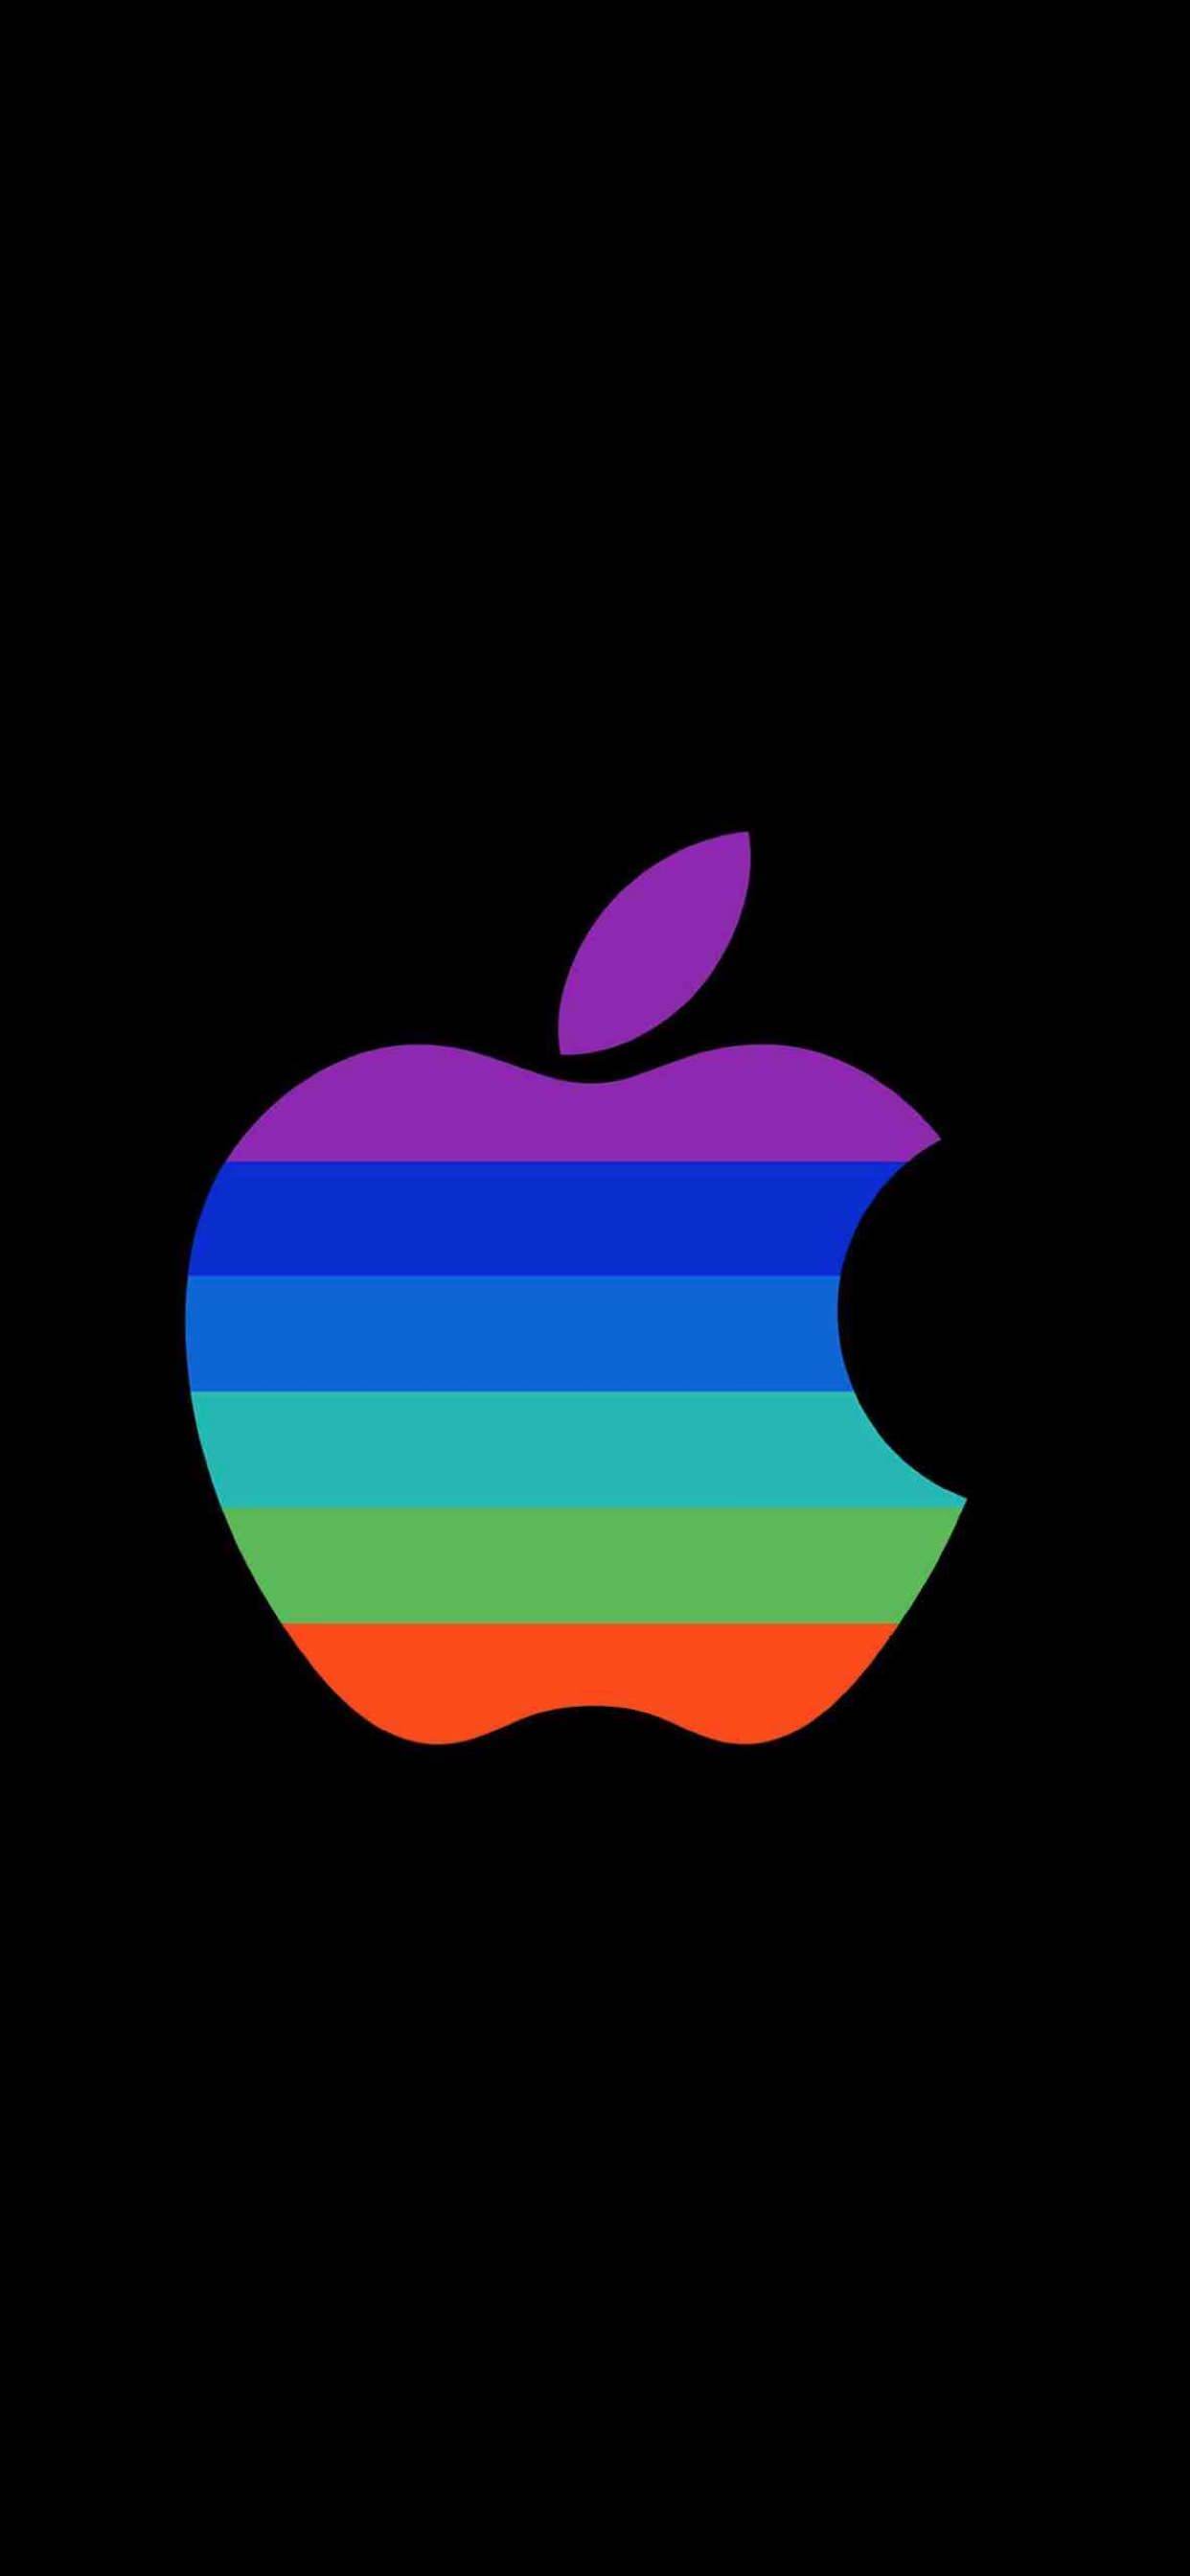 Apple logo colorful black cool  iPhone XS Max